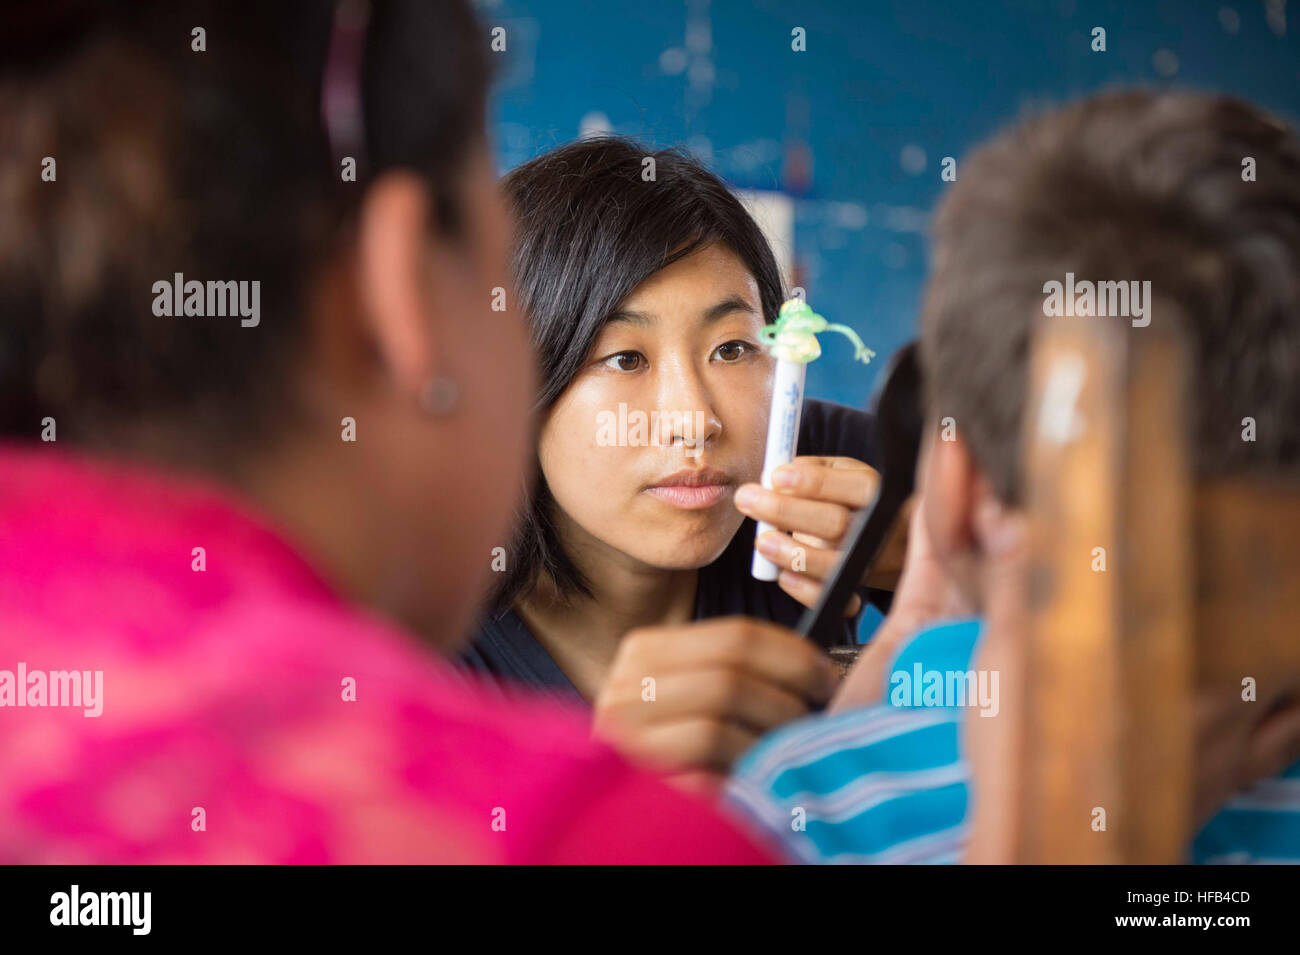 150520-N-AT101-350 PUERTO CABEZAS, Nicaragua (May 20, 2015) - Lt. Serena Leung, a native of Fresno, Calif., and assigned to Naval Hospital Camp Lejeune, N.C., conducts an eye exam on a patient at a medical site set up at Colegio Moravo Juan Amos Comenius during Continuing Promise 2015. Continuing Promise is a U.S. Southern Command-sponsored and U.S. Naval Forces Southern Command/U.S. 4th Fleet-conducted deployment to conduct civil-military operations including humanitarian-civil assistance, subject matter expert exchanges, medical, dental, veterinary and engineering support and disaster respon Stock Photo